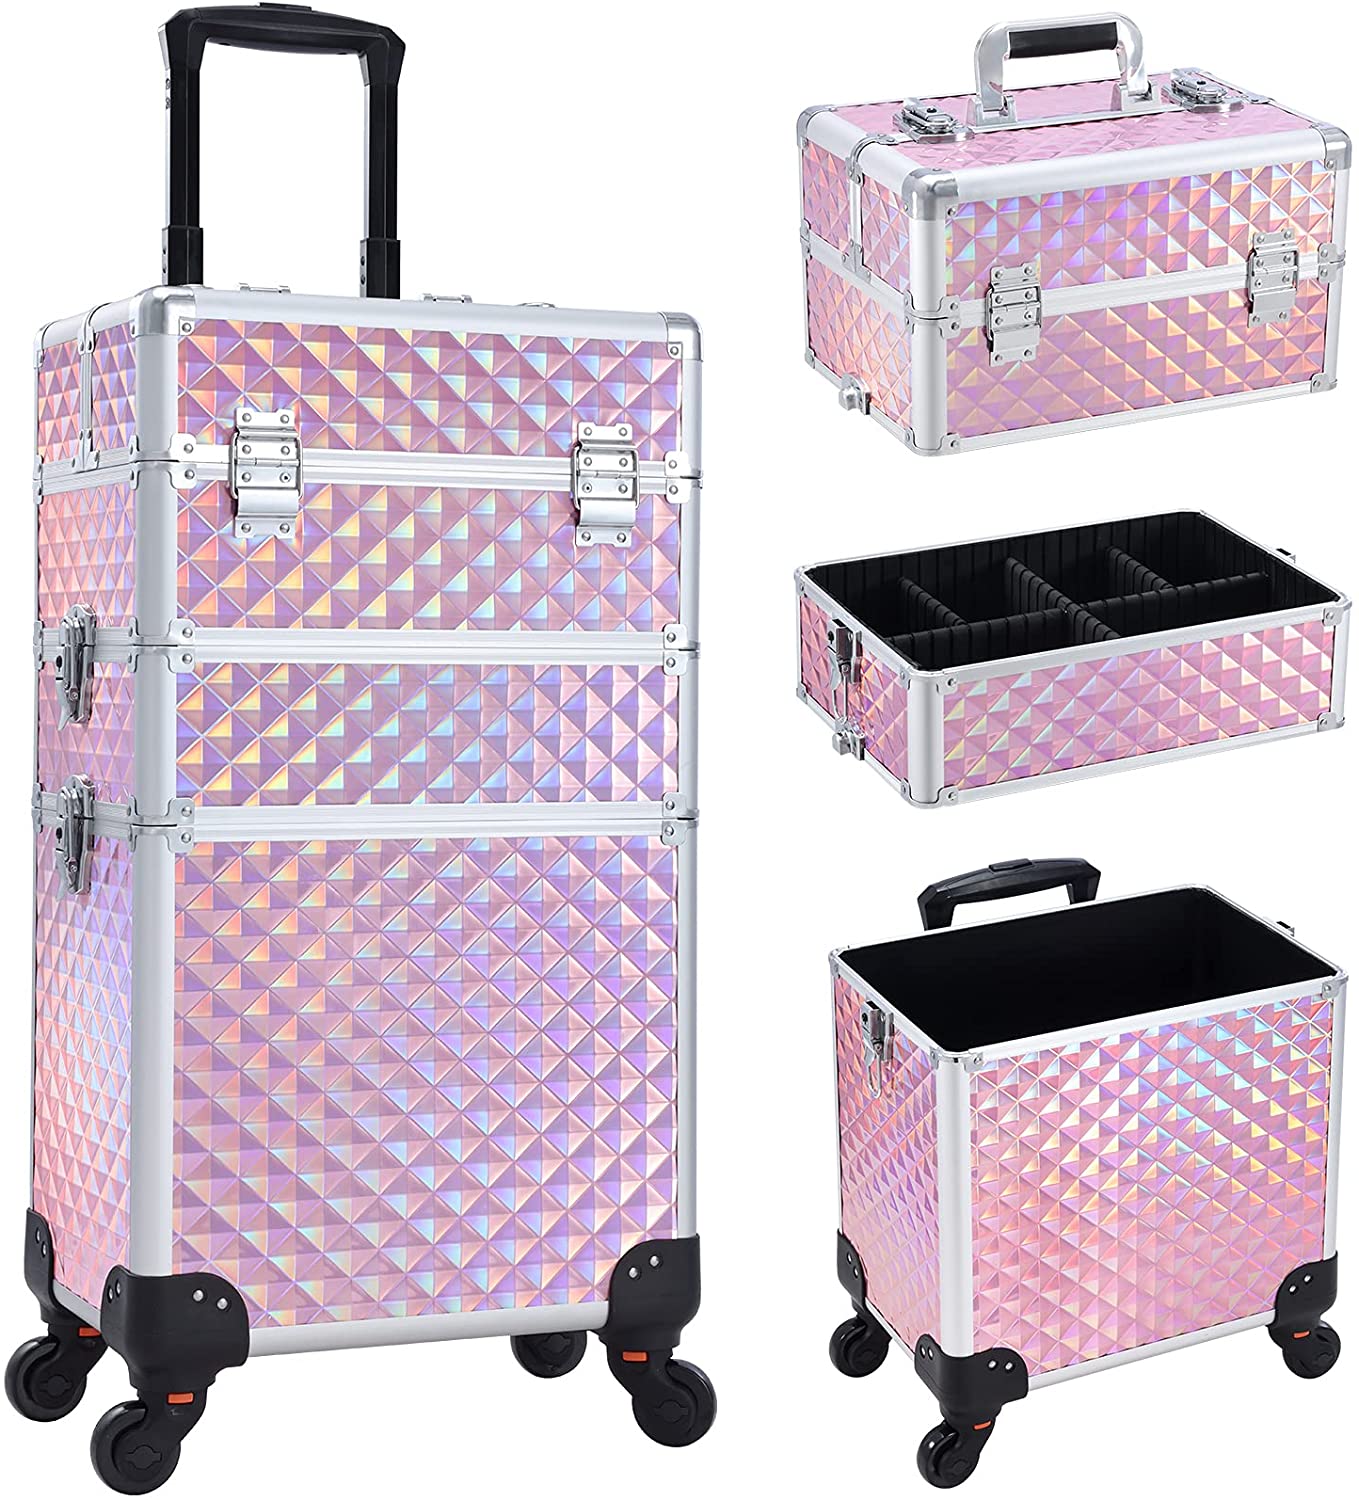 3 In 1 Pink Makeup Trolley Case With